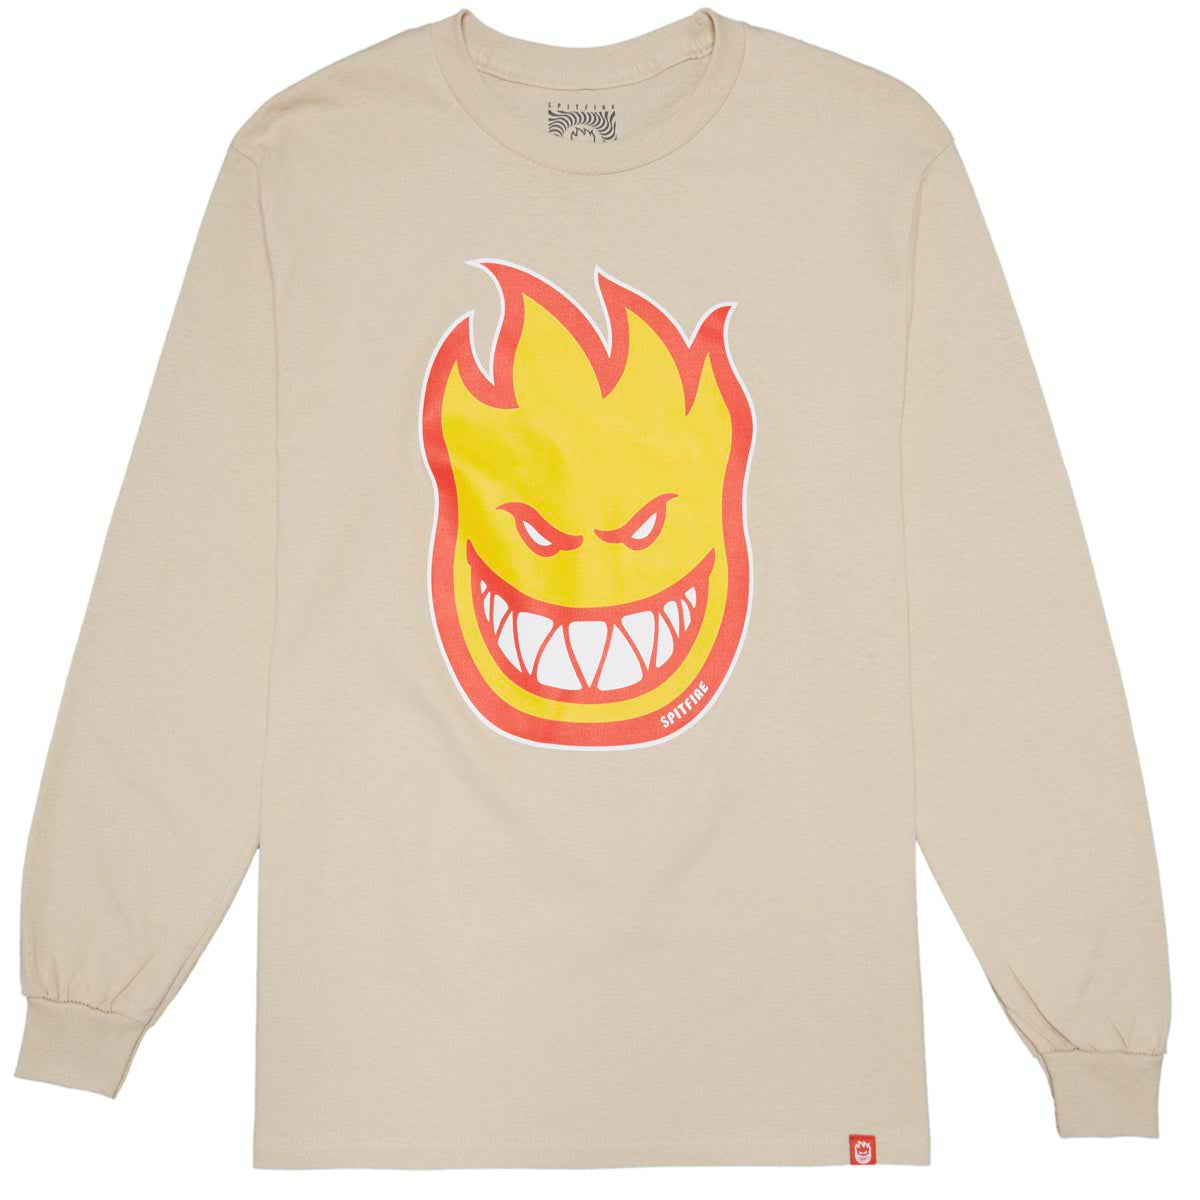 Spitfire Bighead Fill Long Sleeve T-Shirt - Sand/Gold/Red image 1